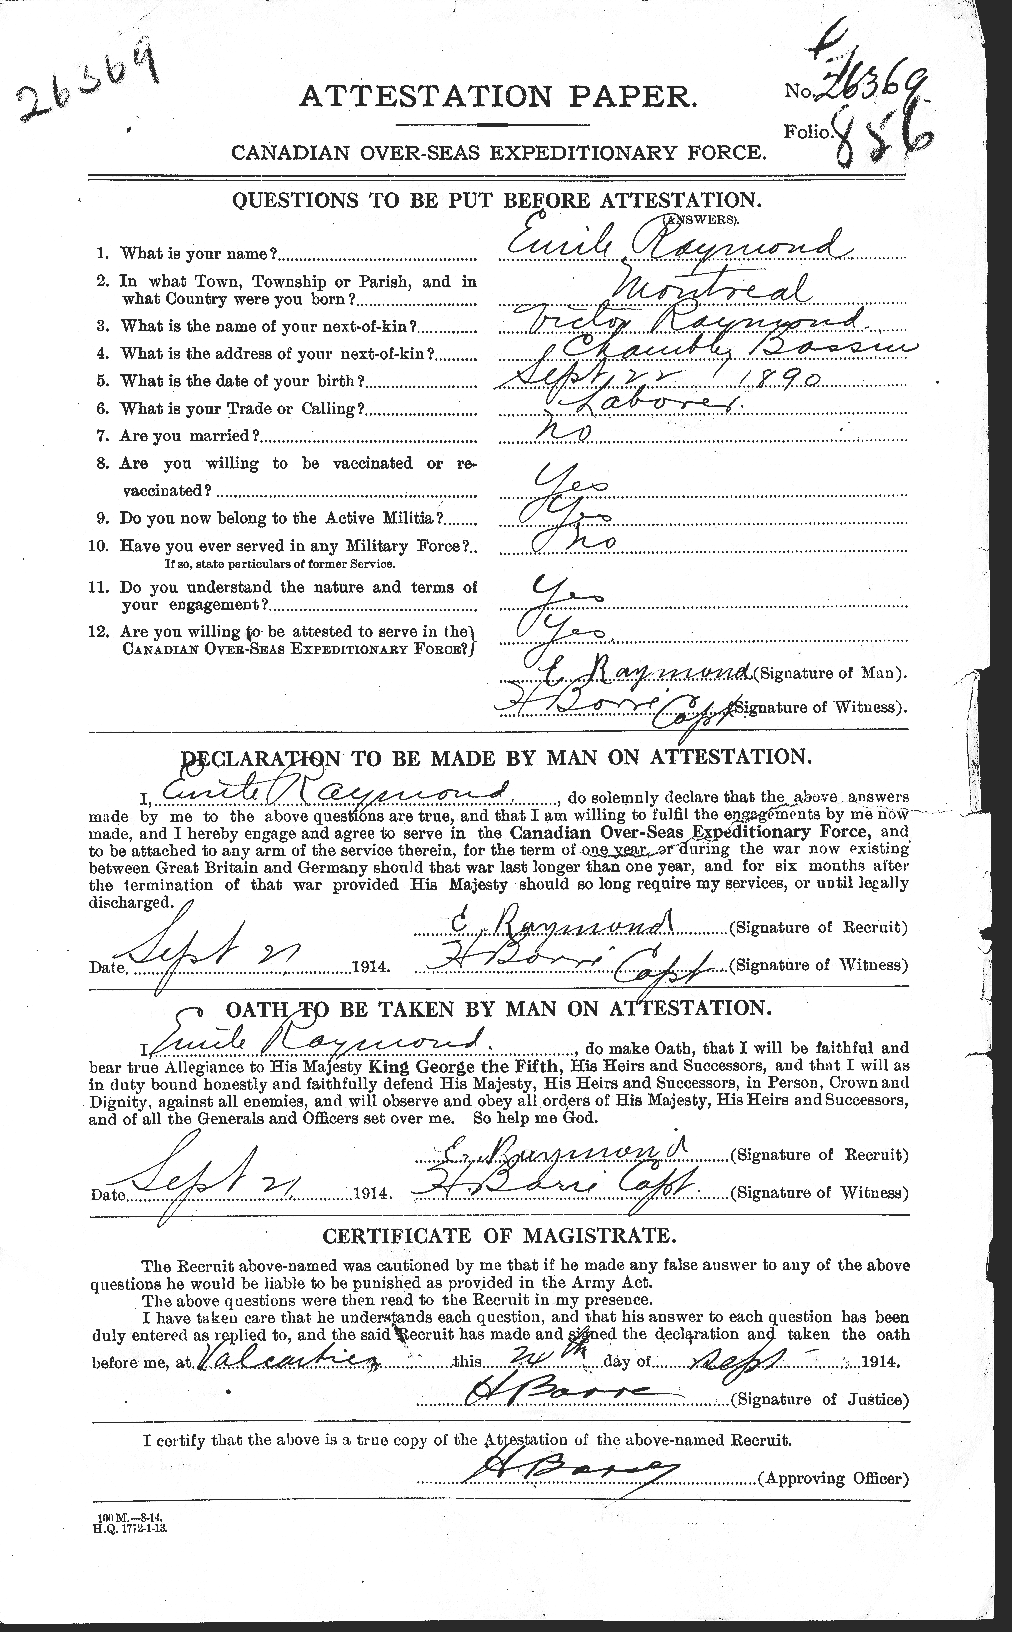 Personnel Records of the First World War - CEF 595314a